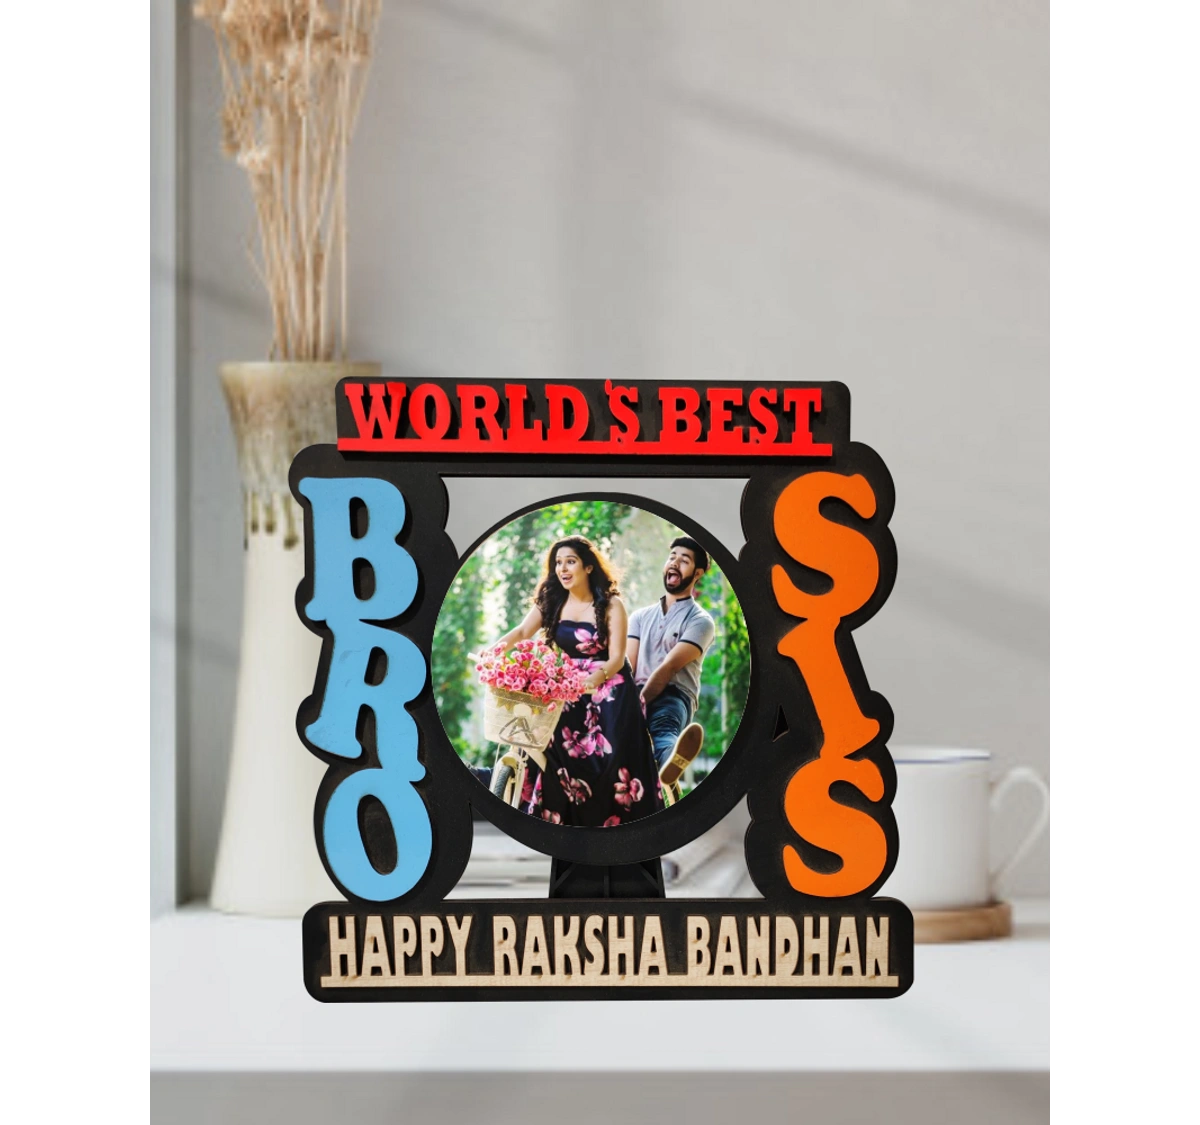 BUy or send BEST BRO SIS Cut Out Frame by Bakers Wagon with PAN India delivery